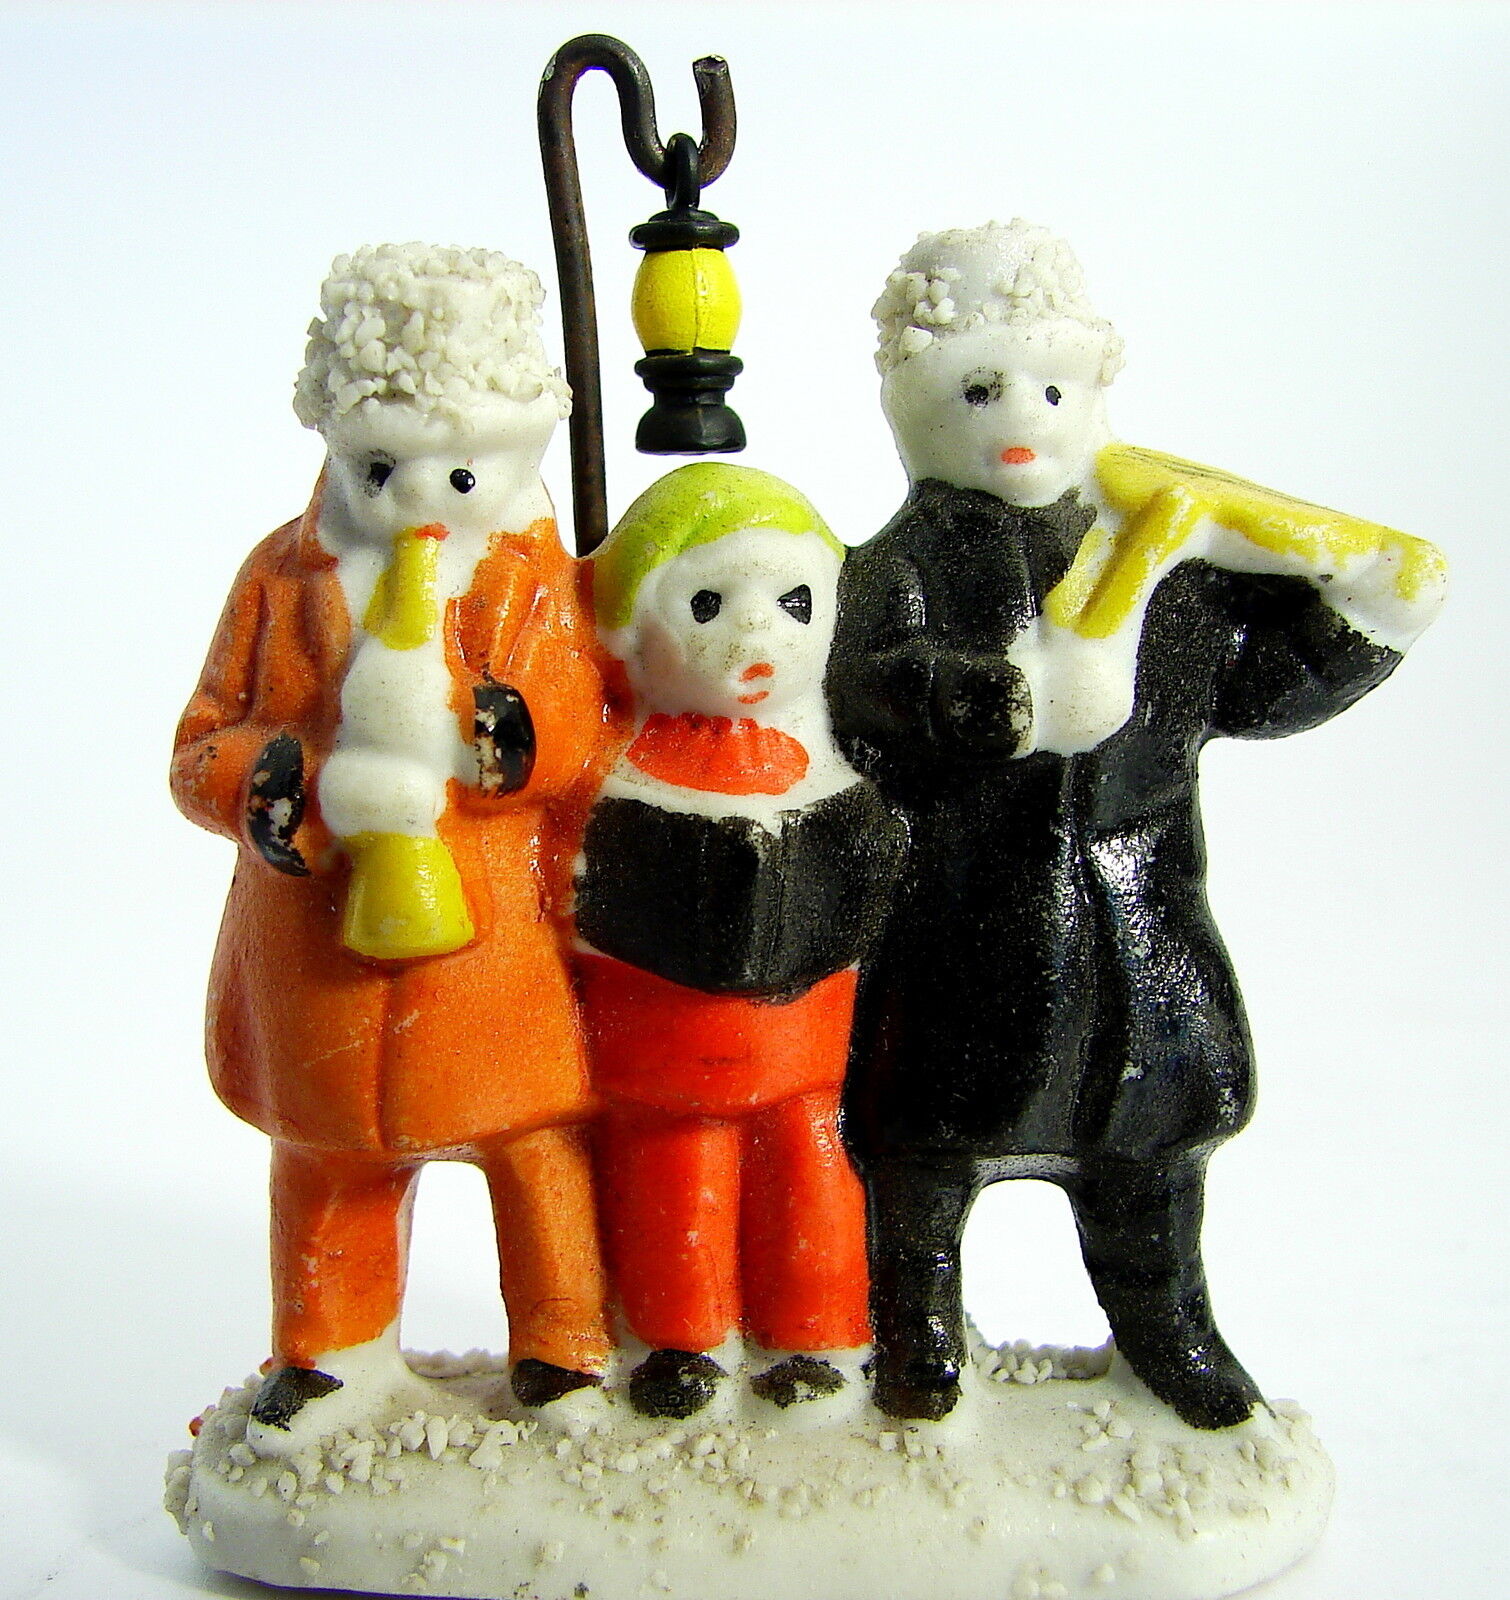 ANTIQUE SNOWBABY:  CAROLERS BY THE LAMPPOST a Japanese 1930s or 1940s Variation